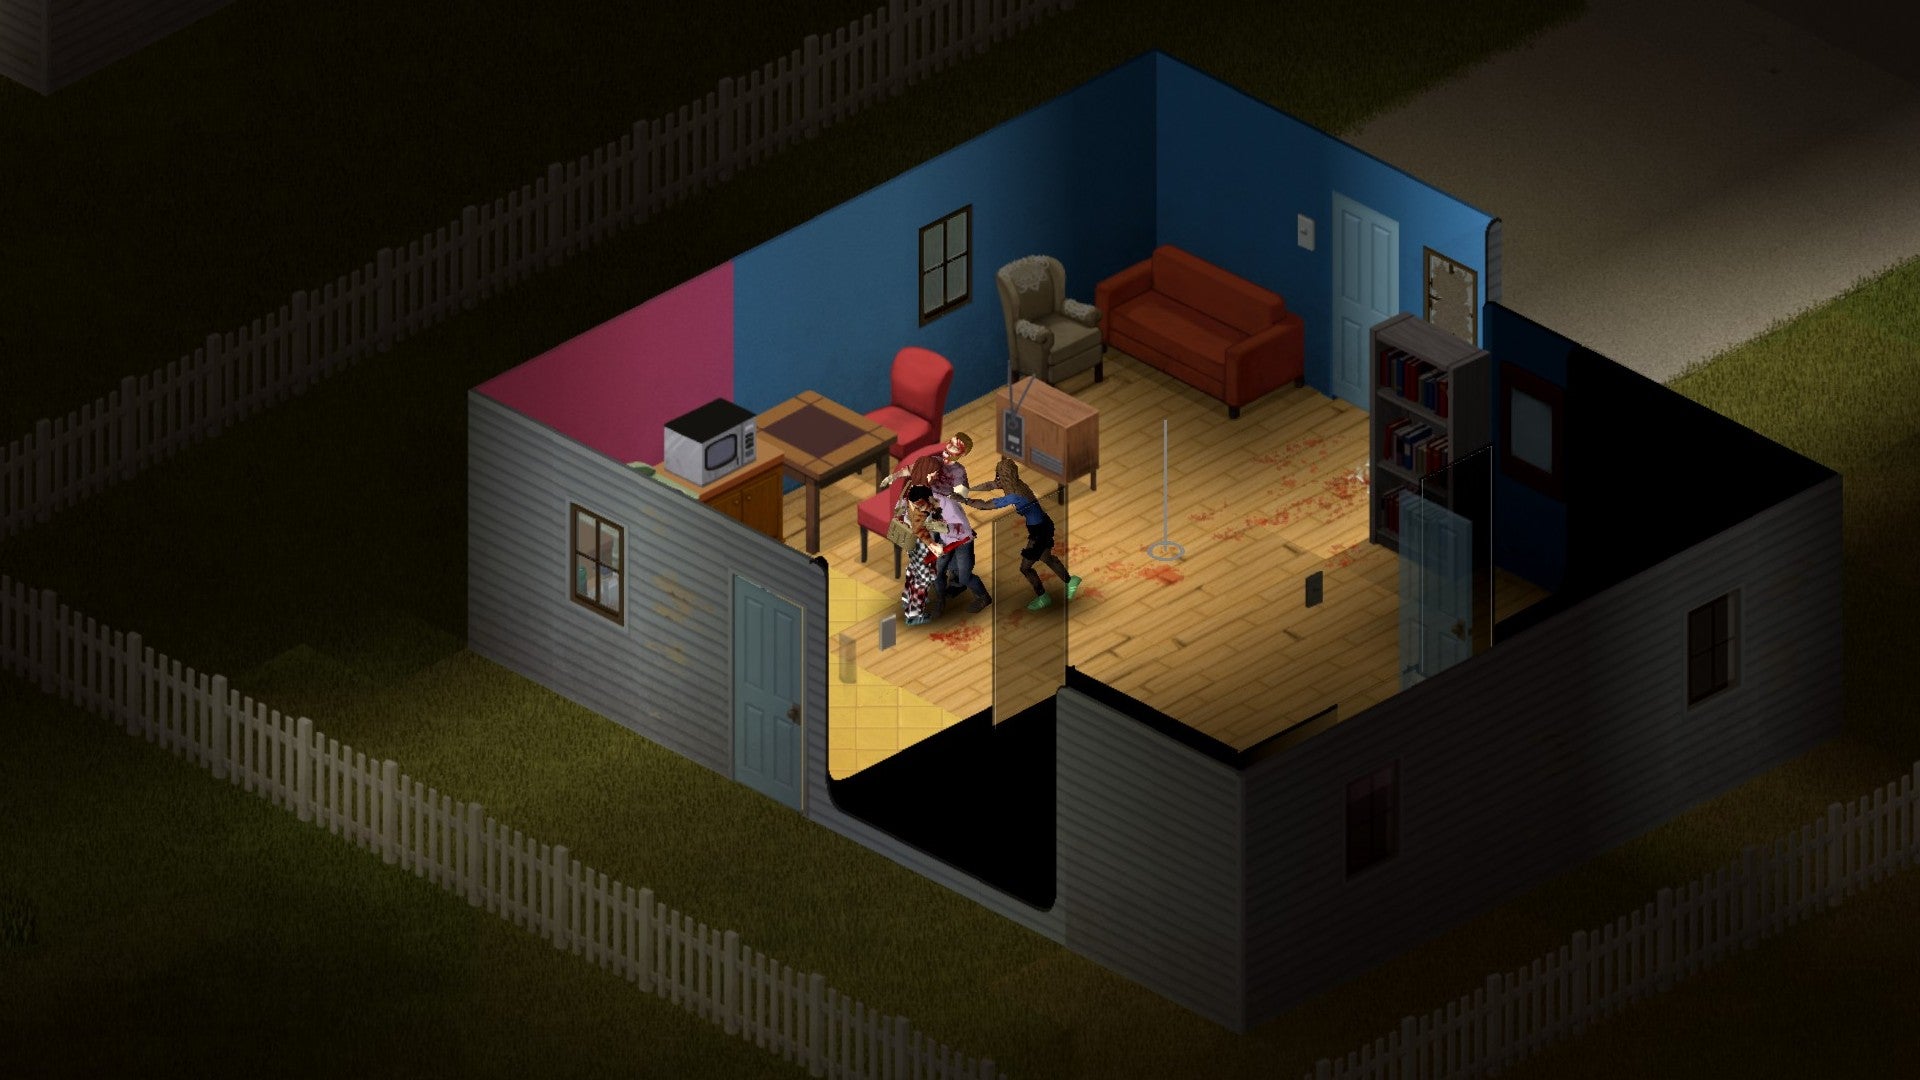 Project Zomboid player in a chef outfit getting eaten by a zombie